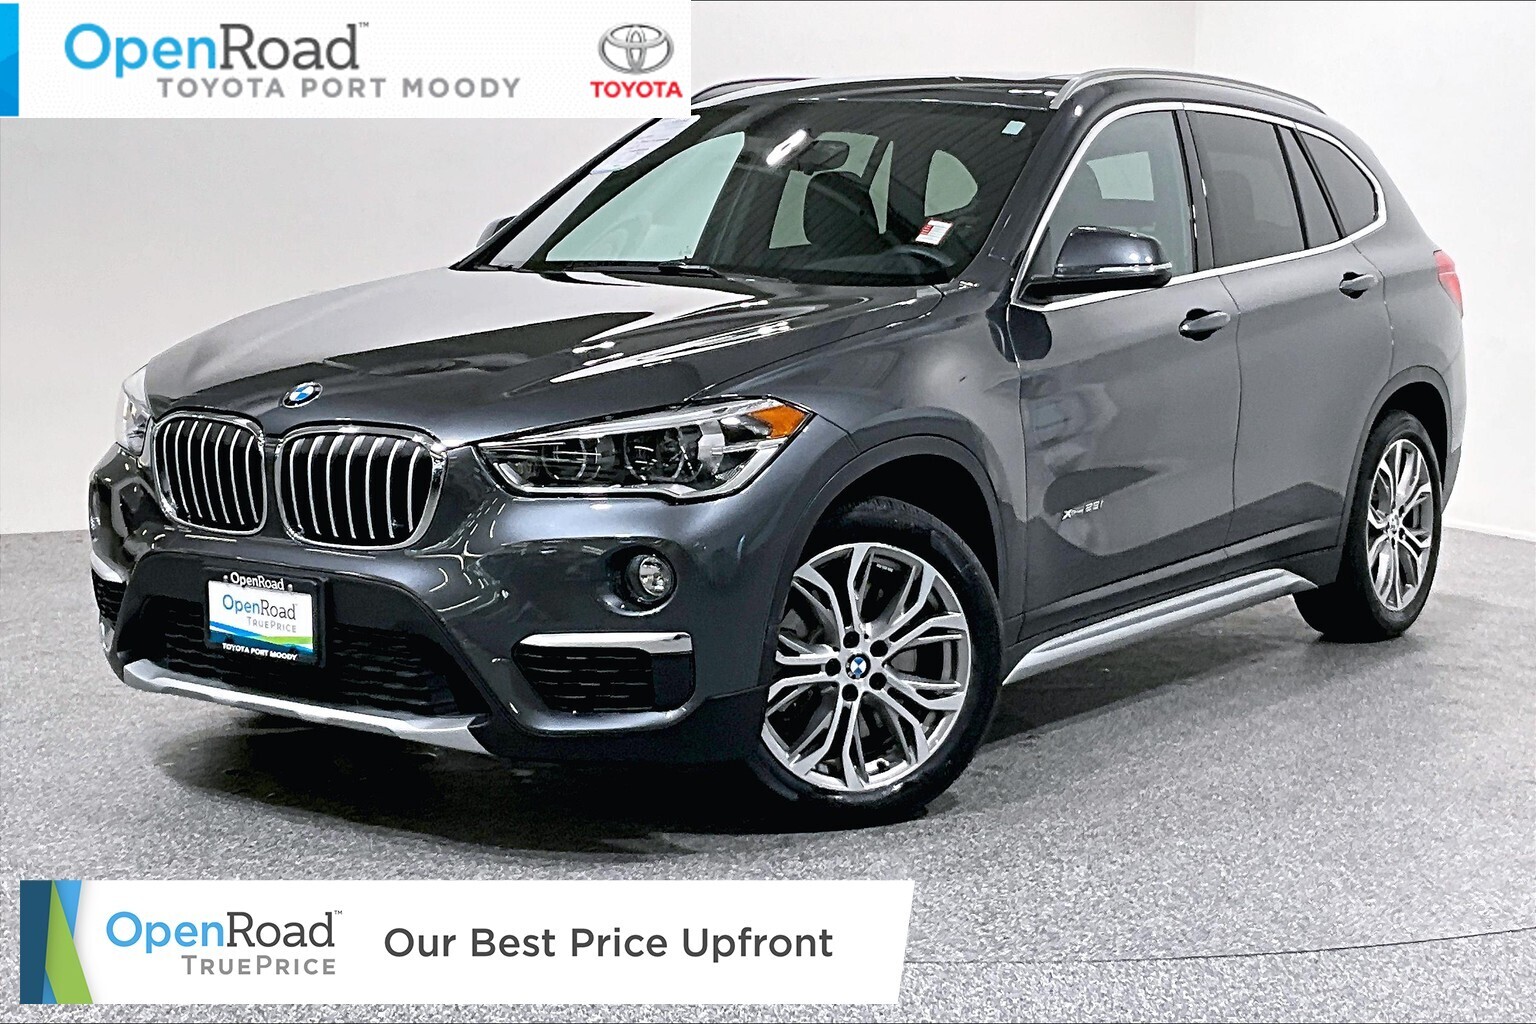 2017 BMW X1 xDrive28i |OpenRoad True Price |Local |One Owner